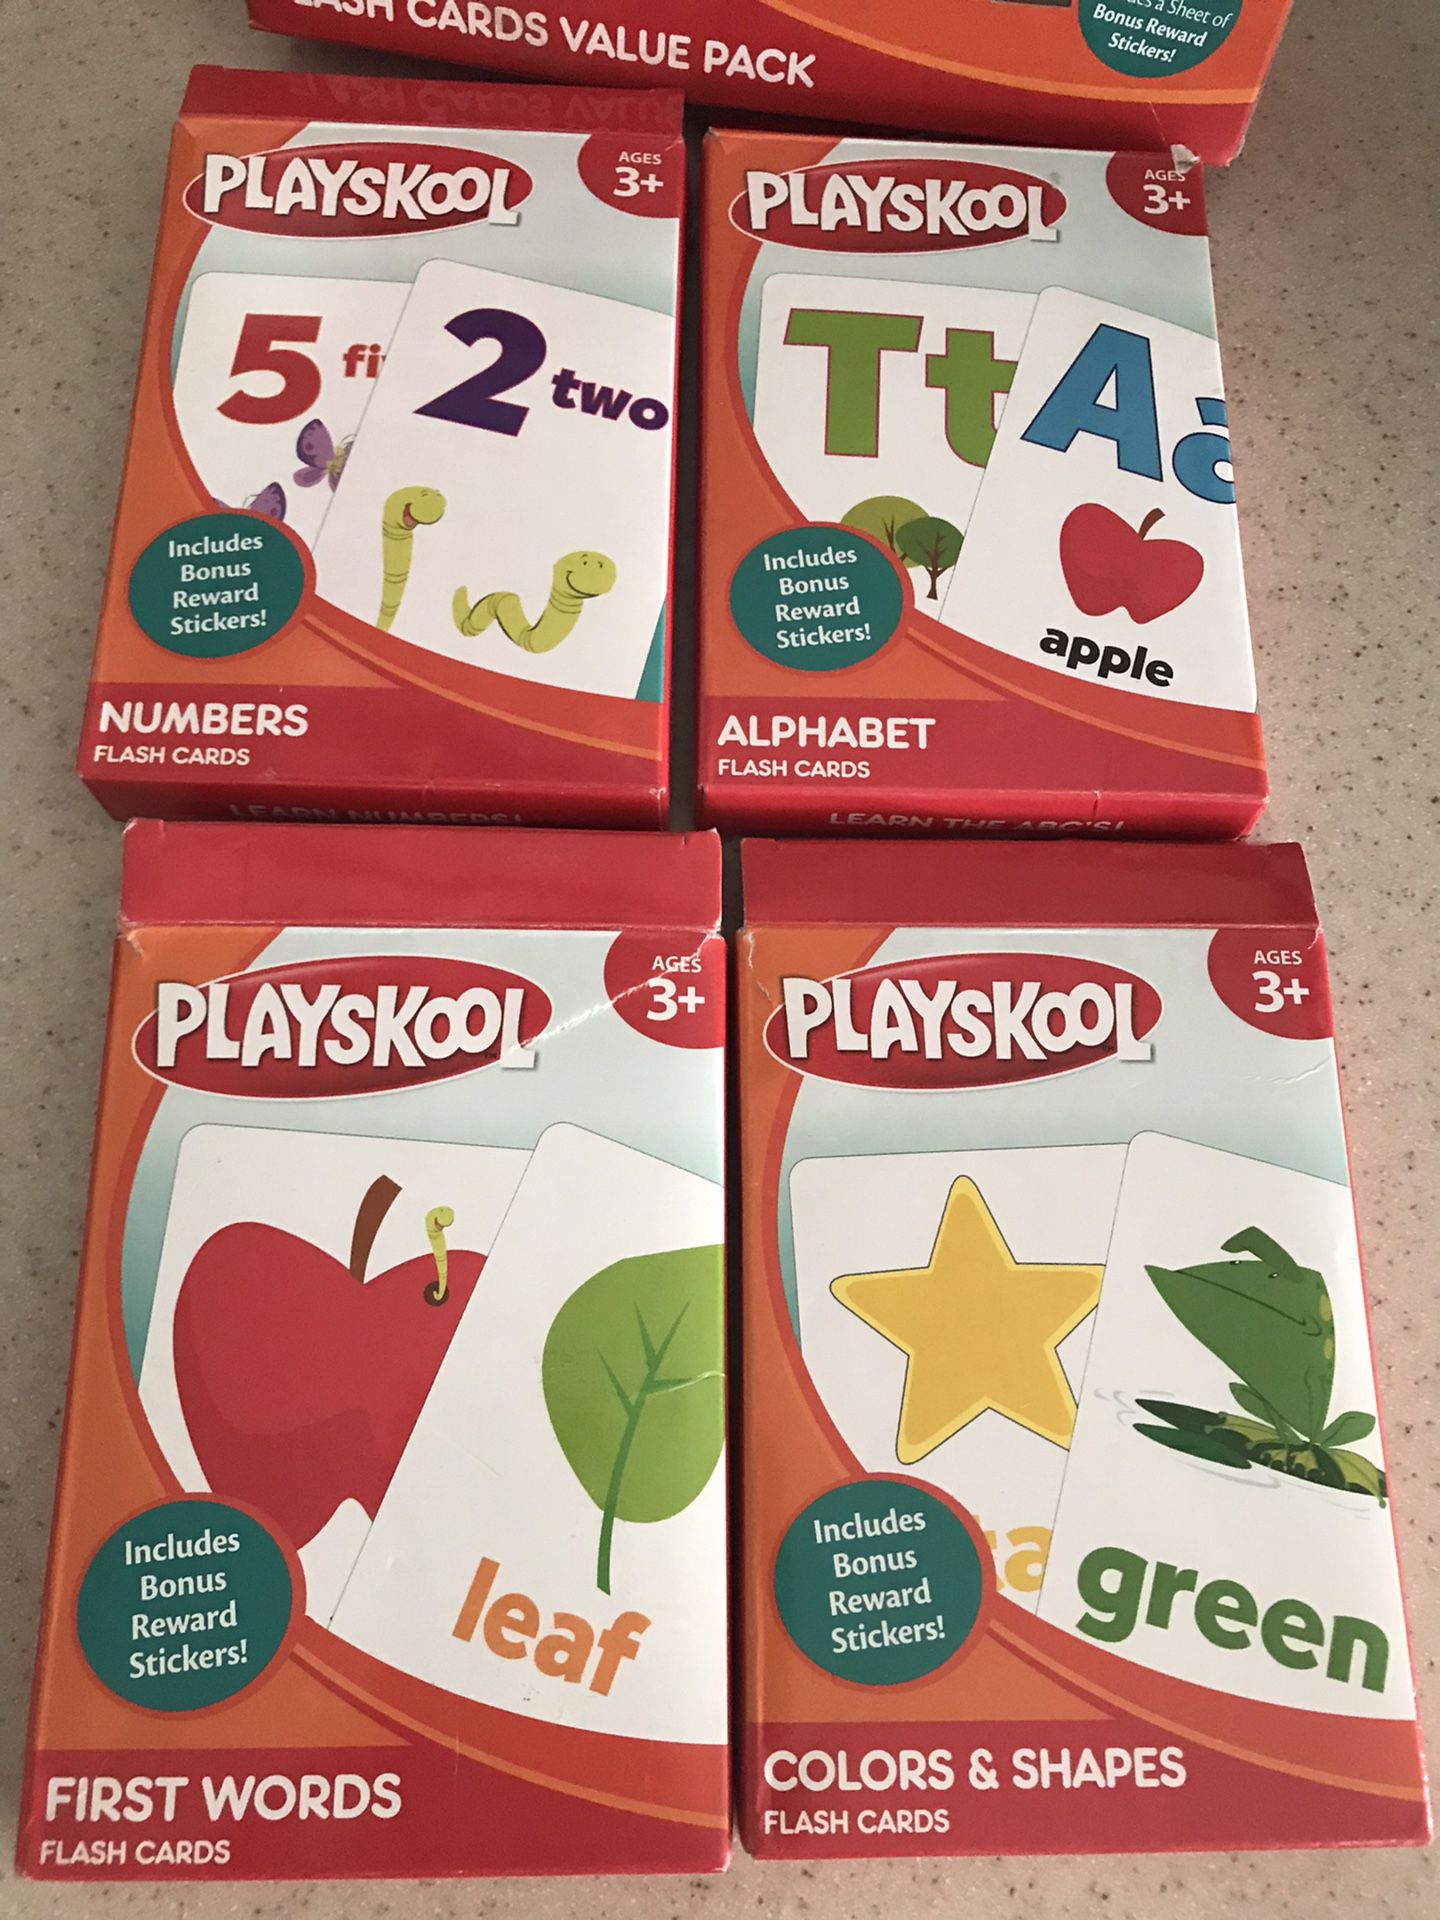 Playskool Flash Cards Value Pack Ages 3+